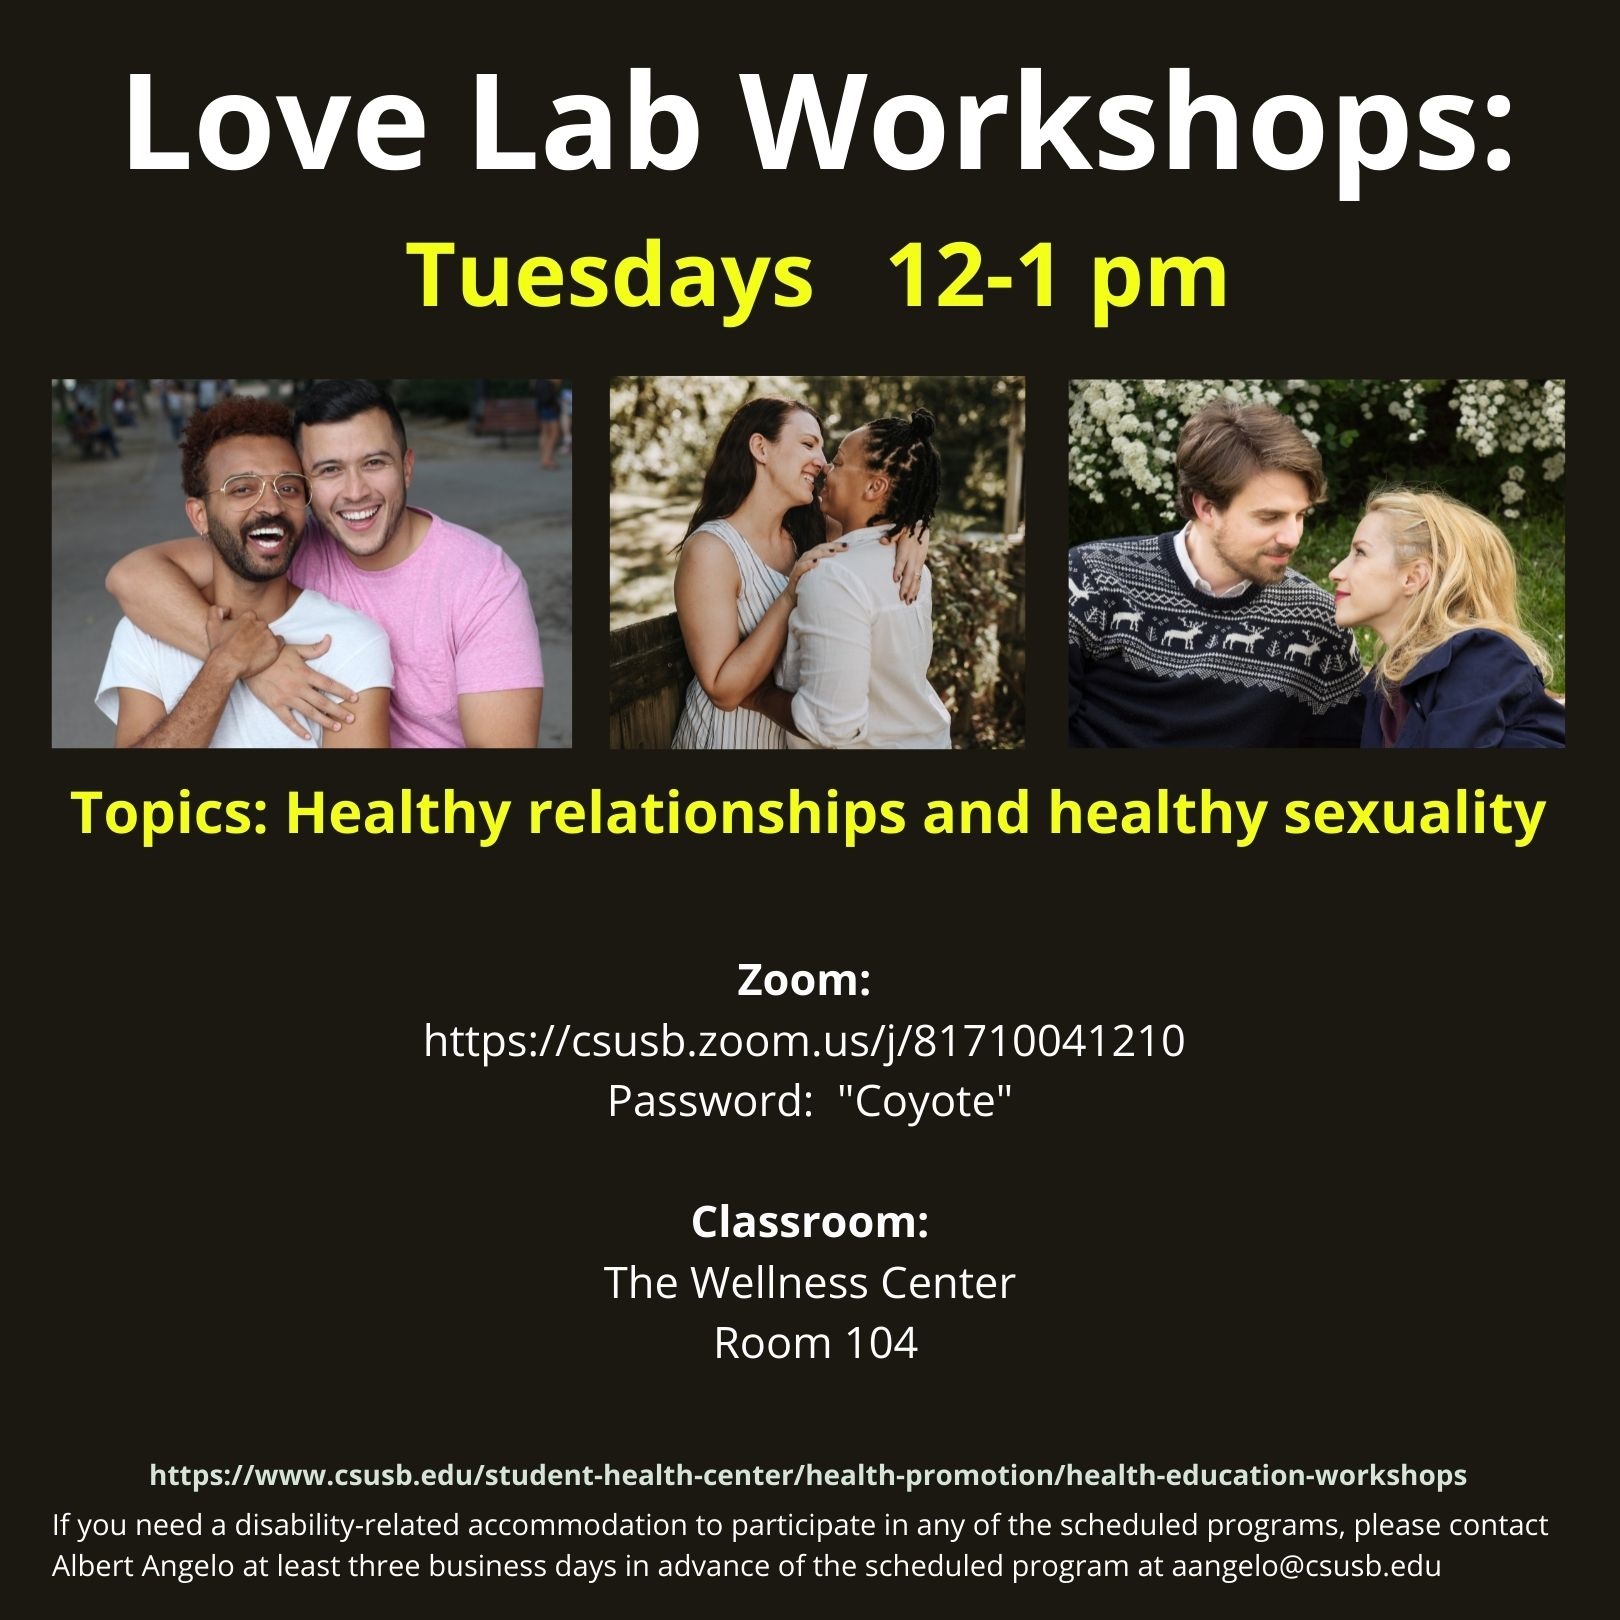 Love Lab Workshops.  Wellness workshops covering healthy relationships and healthy sexuality